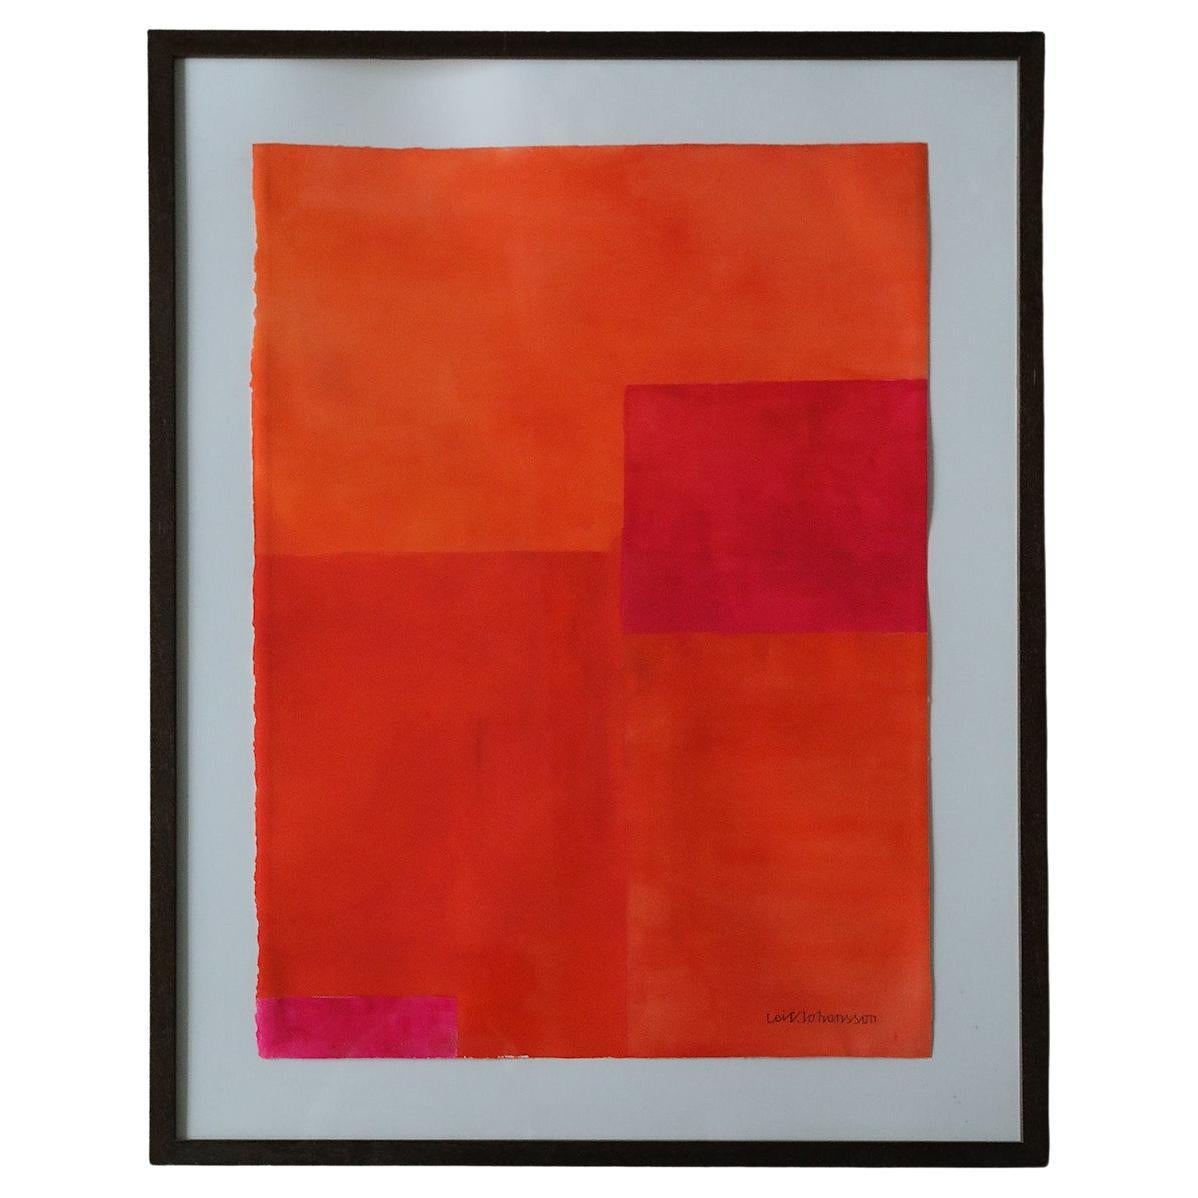 Watercolor on Arches paper by Leif Johansson, Abstract Composition, Framed For Sale